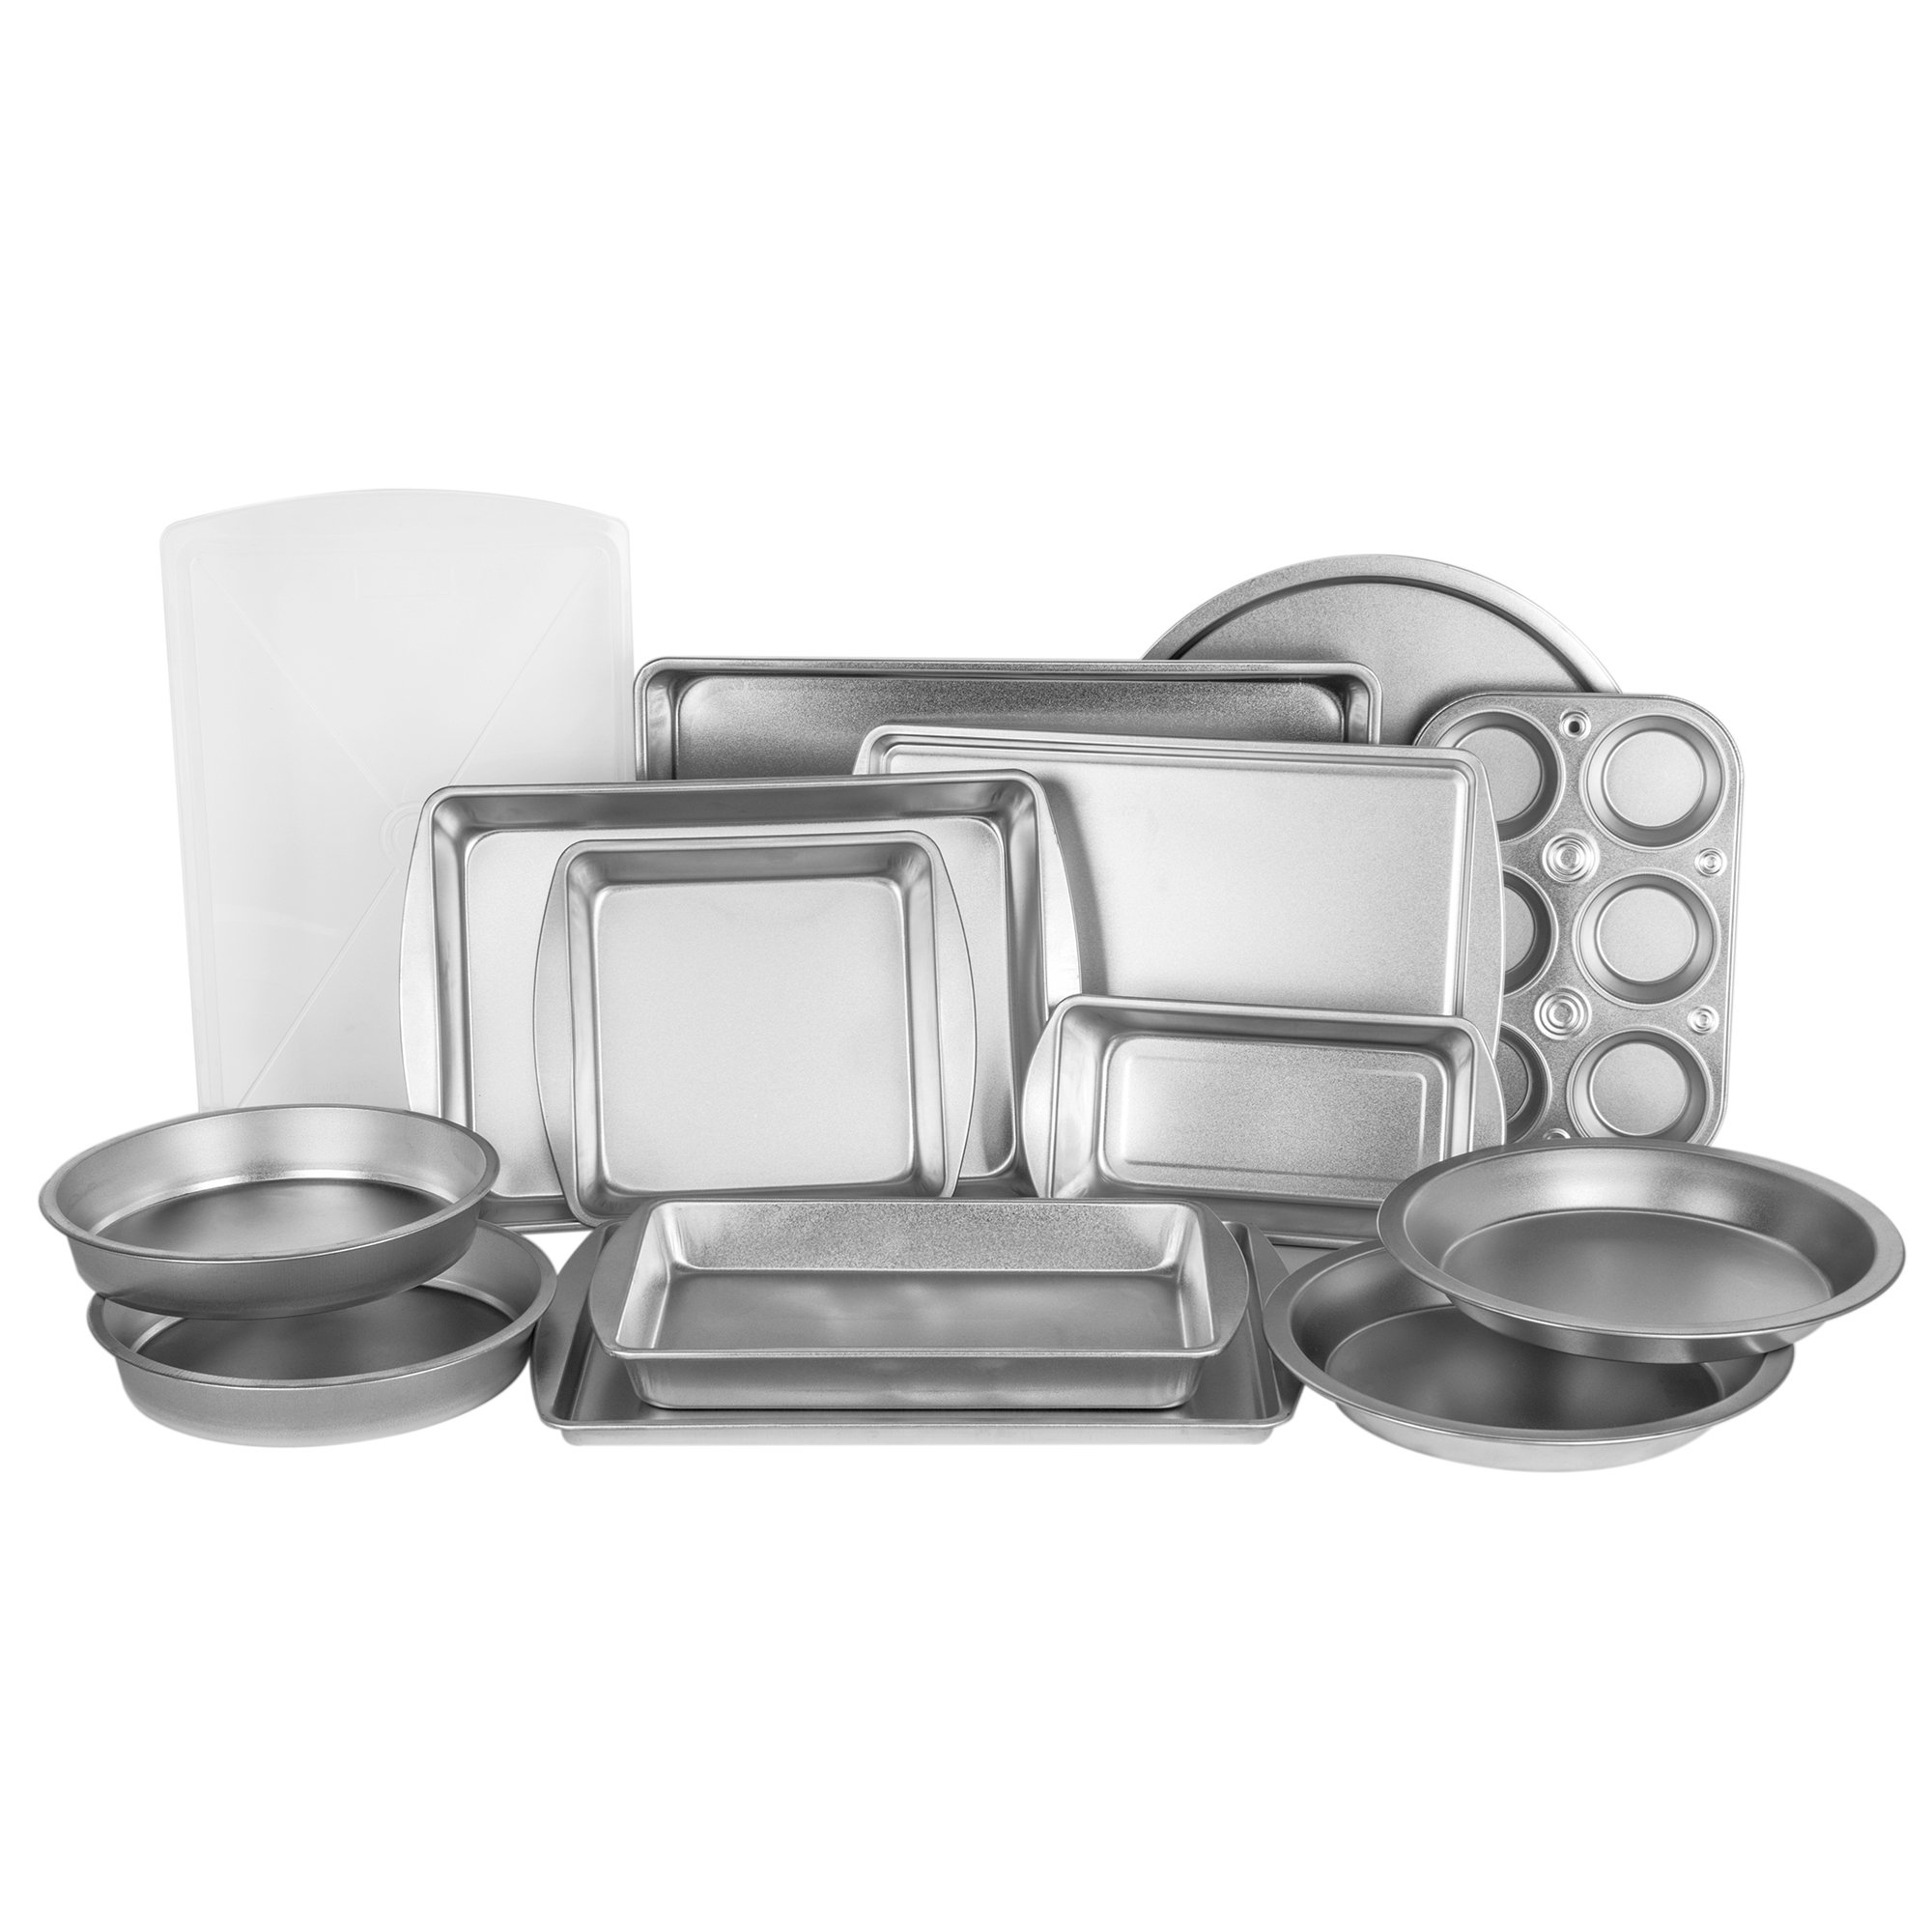 G & S Metal Products Company EZ Baker Uncoated, Durable Steel Construction 14-Piece Bakeware Set